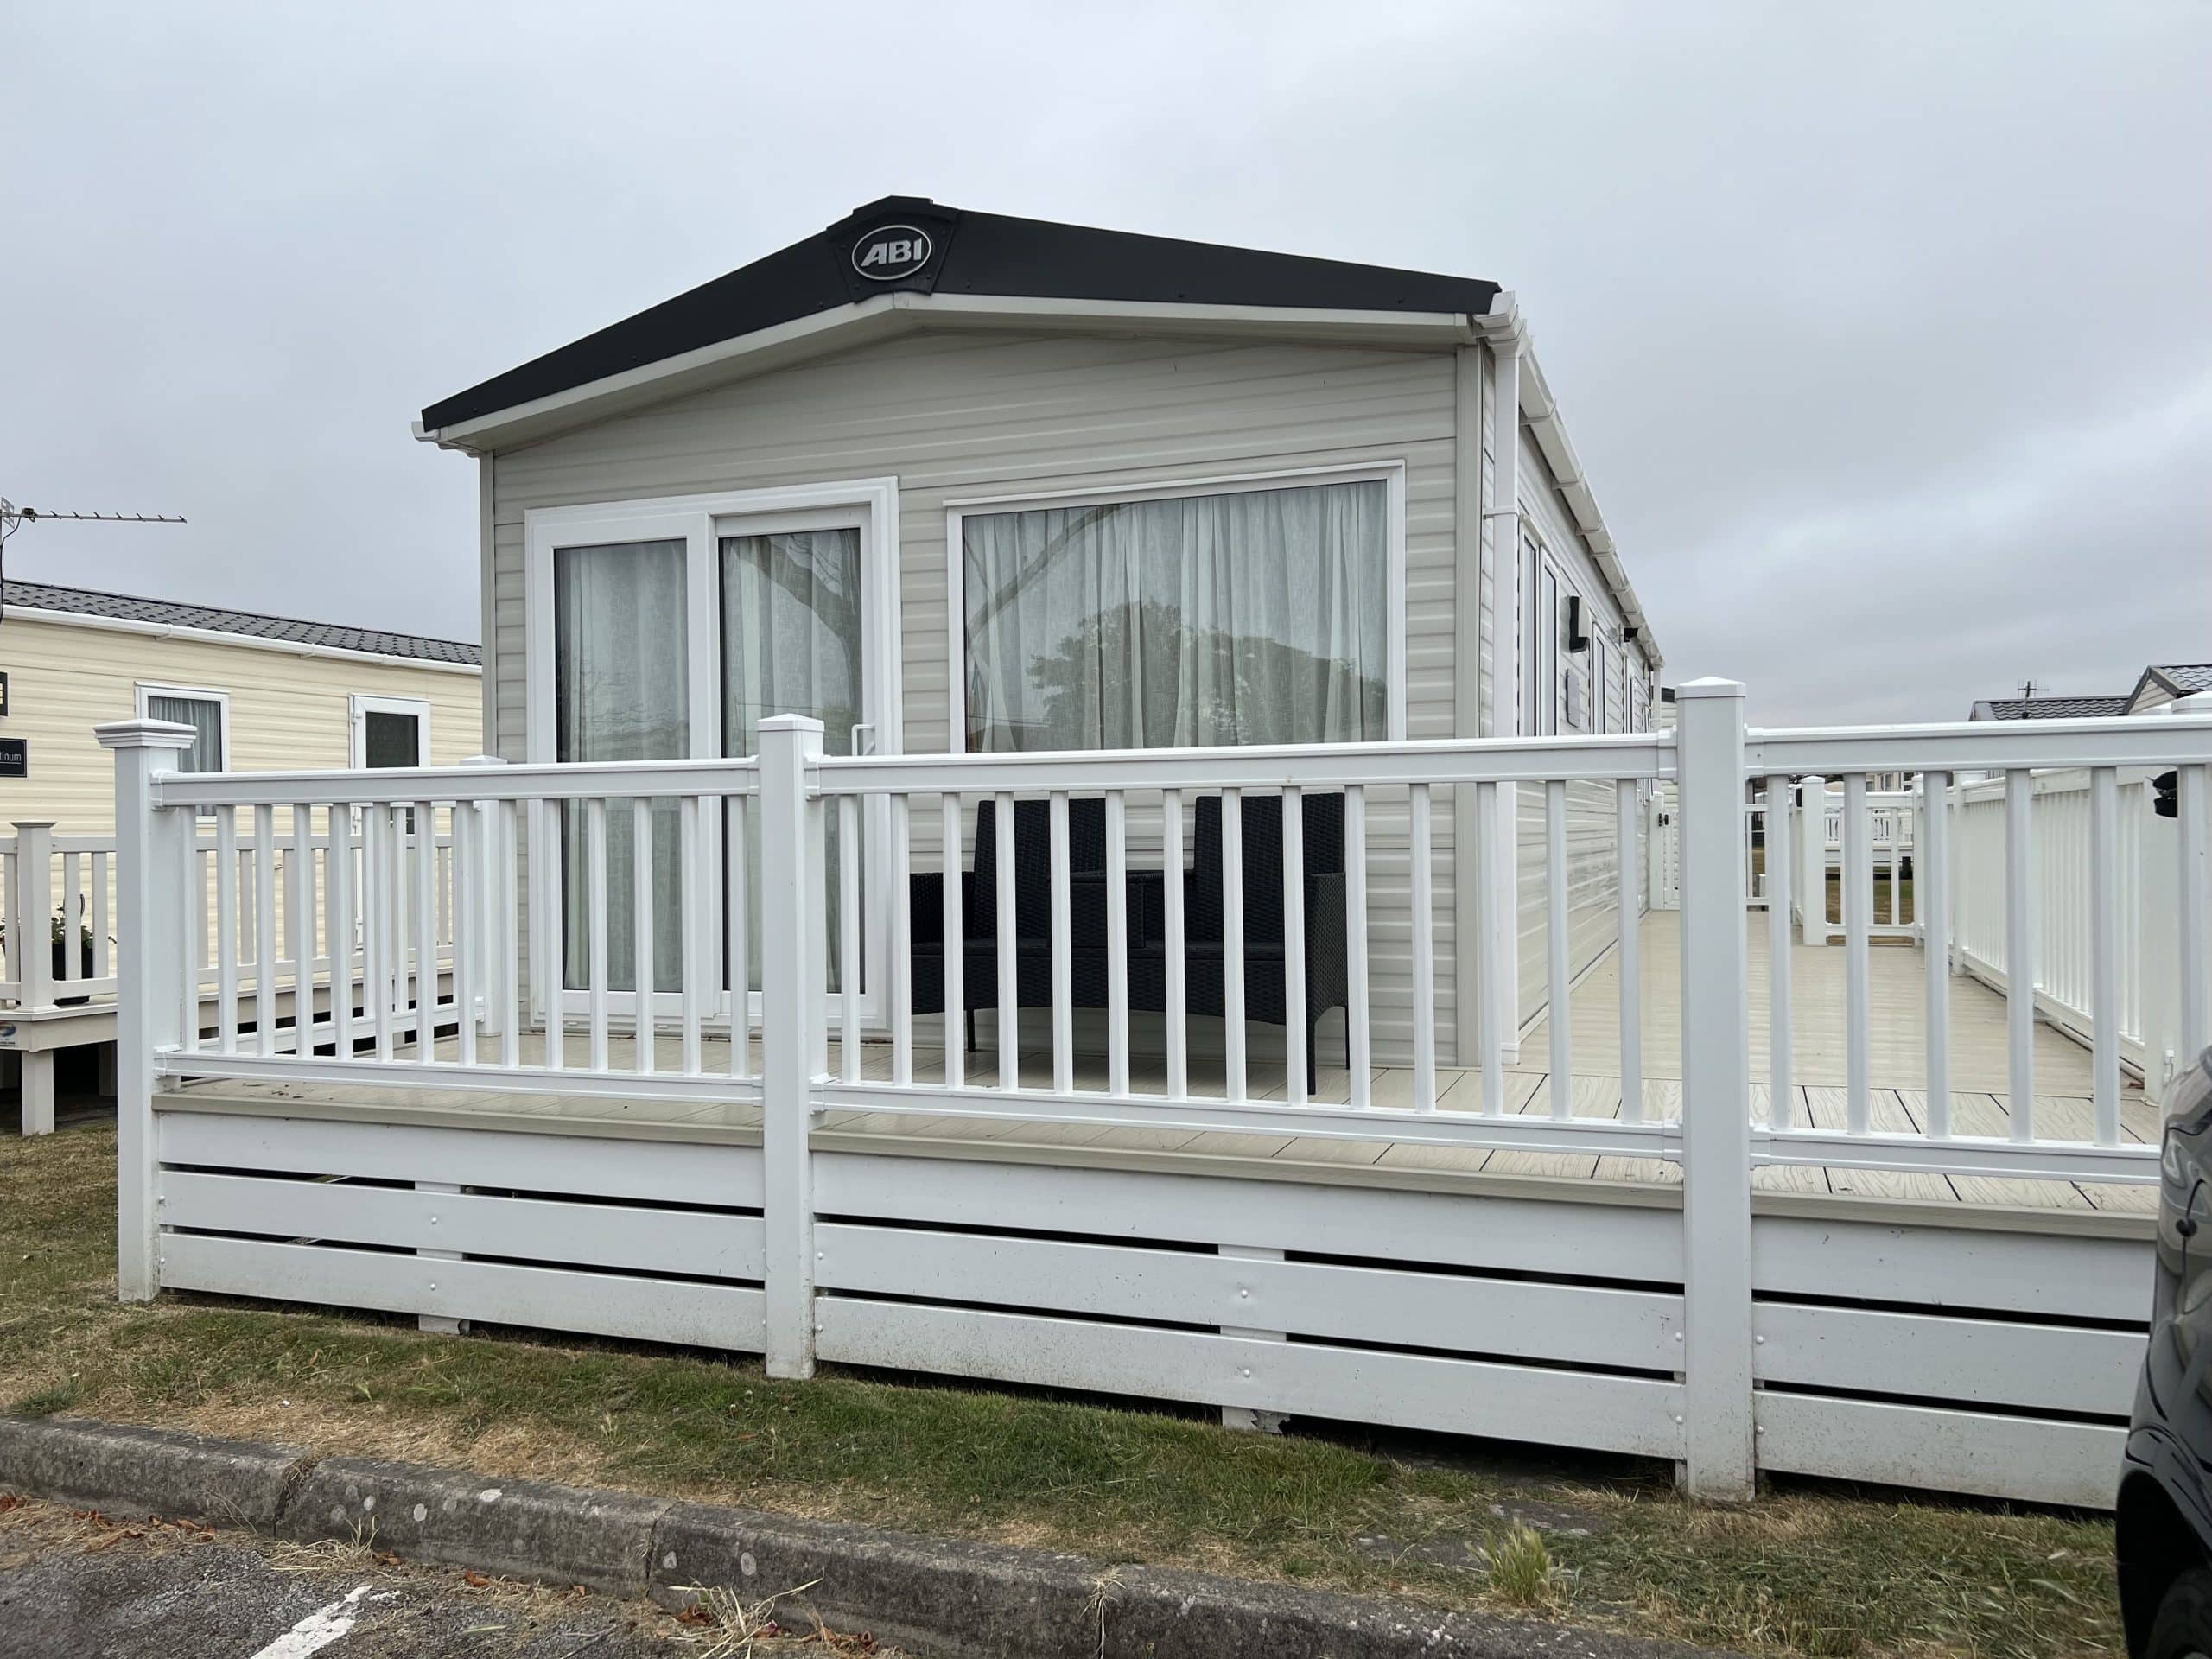 Image 2 of lovely-2-bedroom-static-holiday-home-for-sale-in-barton-on-sea-sleeps-up-to-6-people